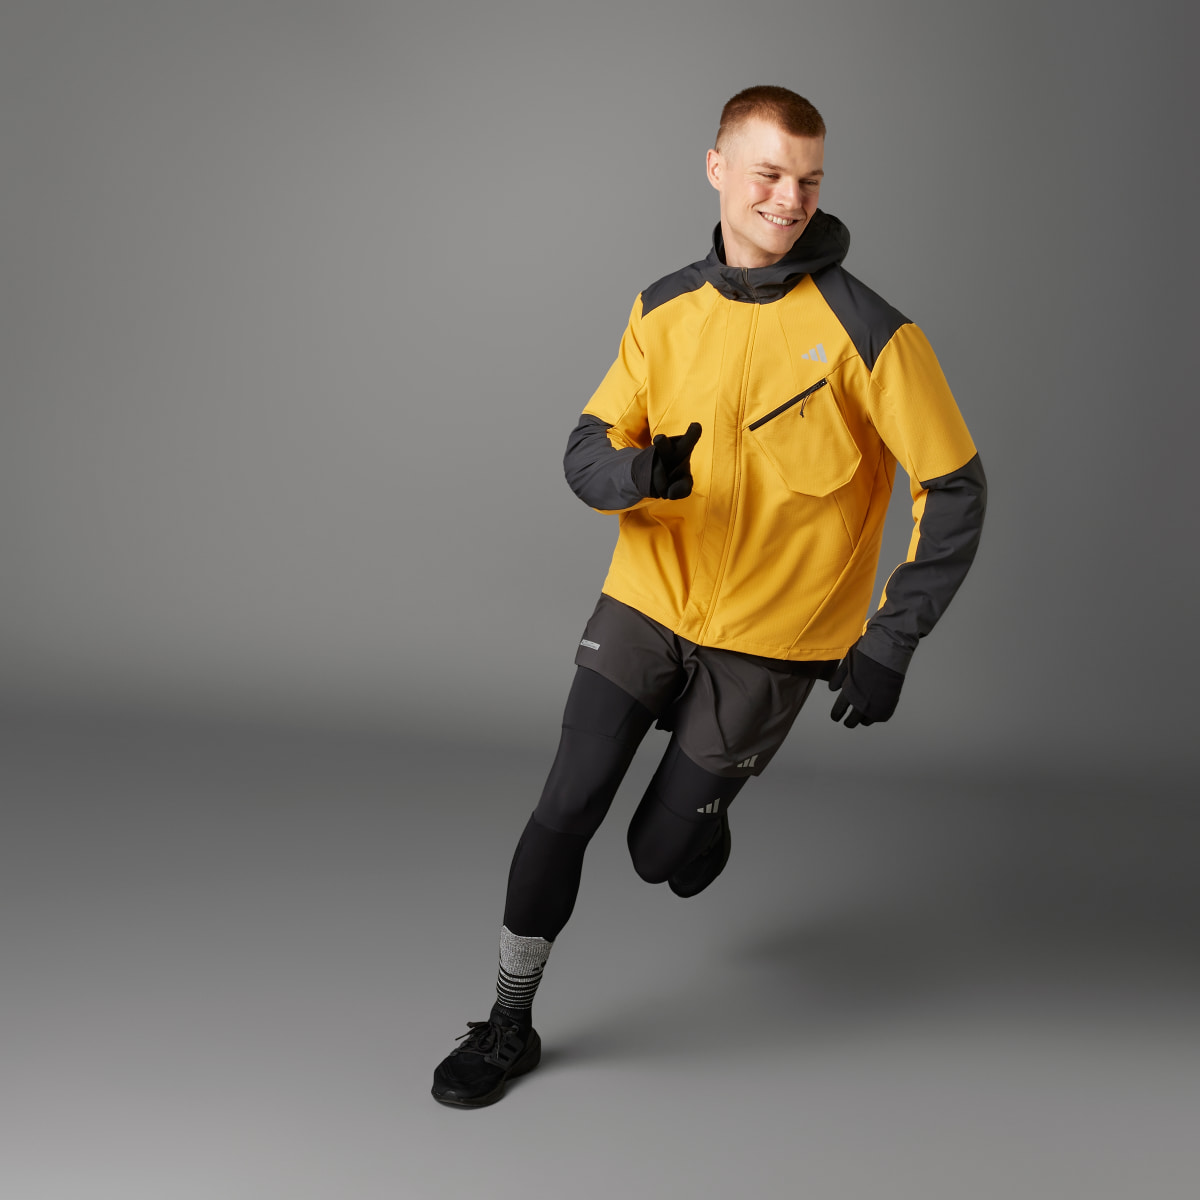 Adidas Ultimate Running Conquer the Elements COLD.RDY Jacket. 10